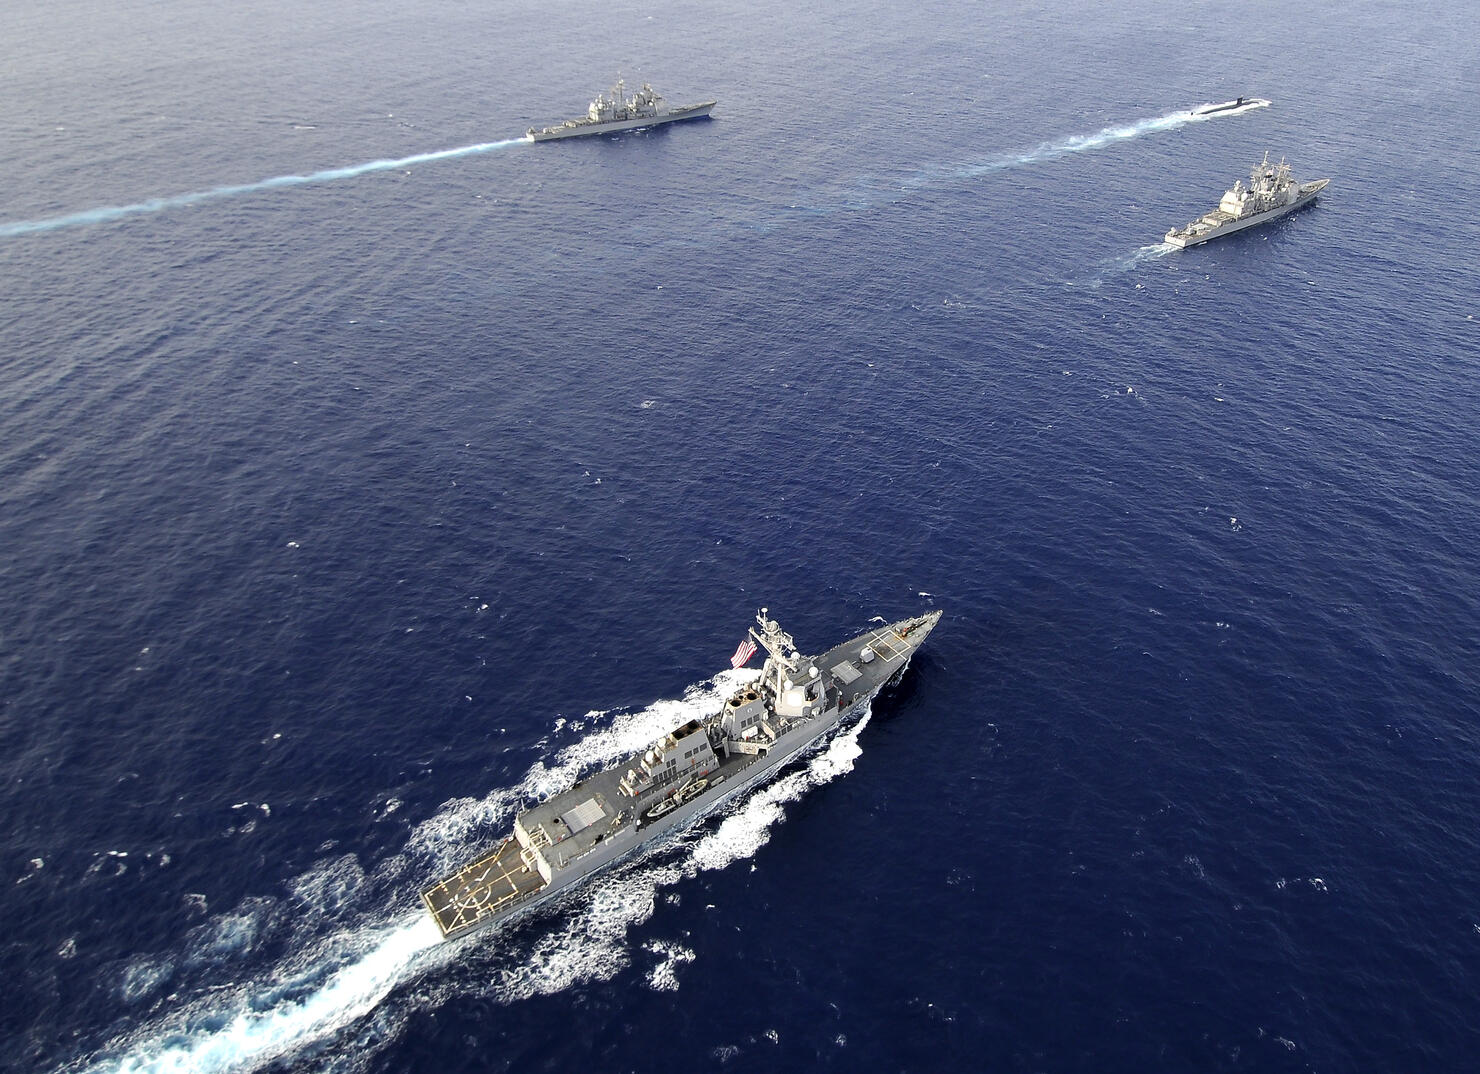 Aerial view of a naval fleet transiting the Pacific Ocean.